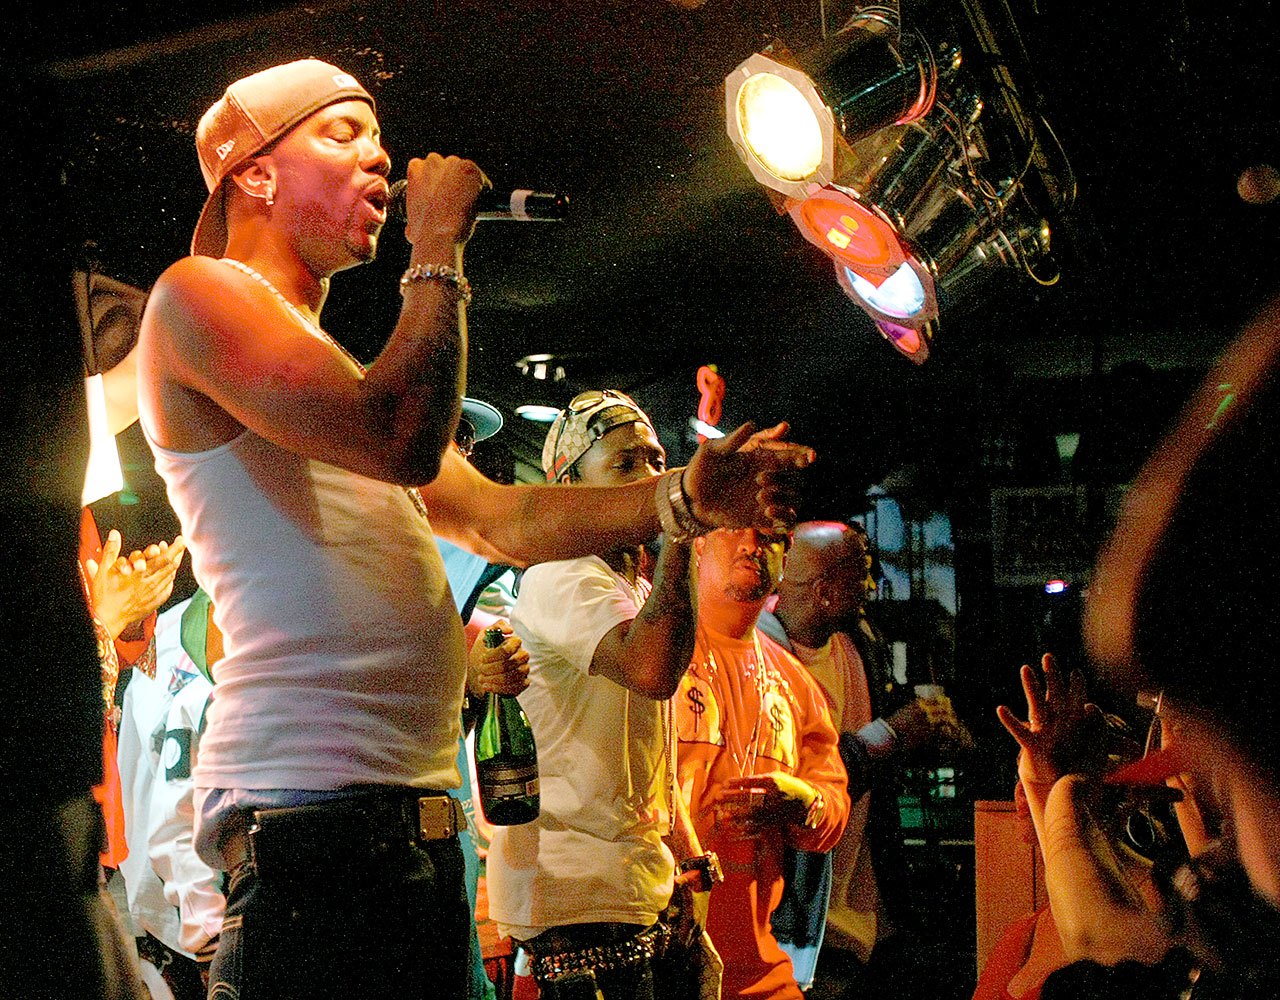 Everett rapper Swag performs in Marysville in May 2009. He opened for multi-platinum artist Juvenile at the show, and credited his friendship with Juvenile for the rapper’s appearance in Marysville. But police say informants told them Swag paid Juvenile $40,000 to perform. (Jennifer Buchanan / The Herald)